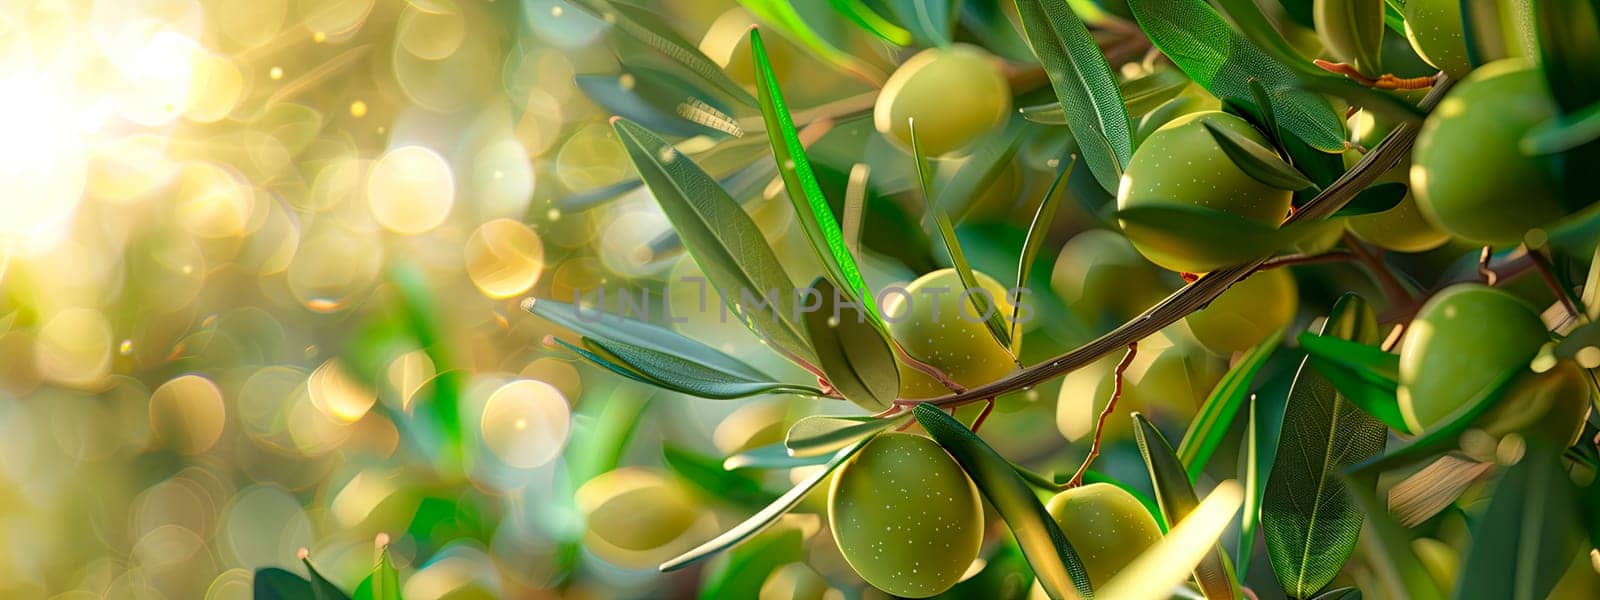 olives on a branch in the garden. selective focus. food.